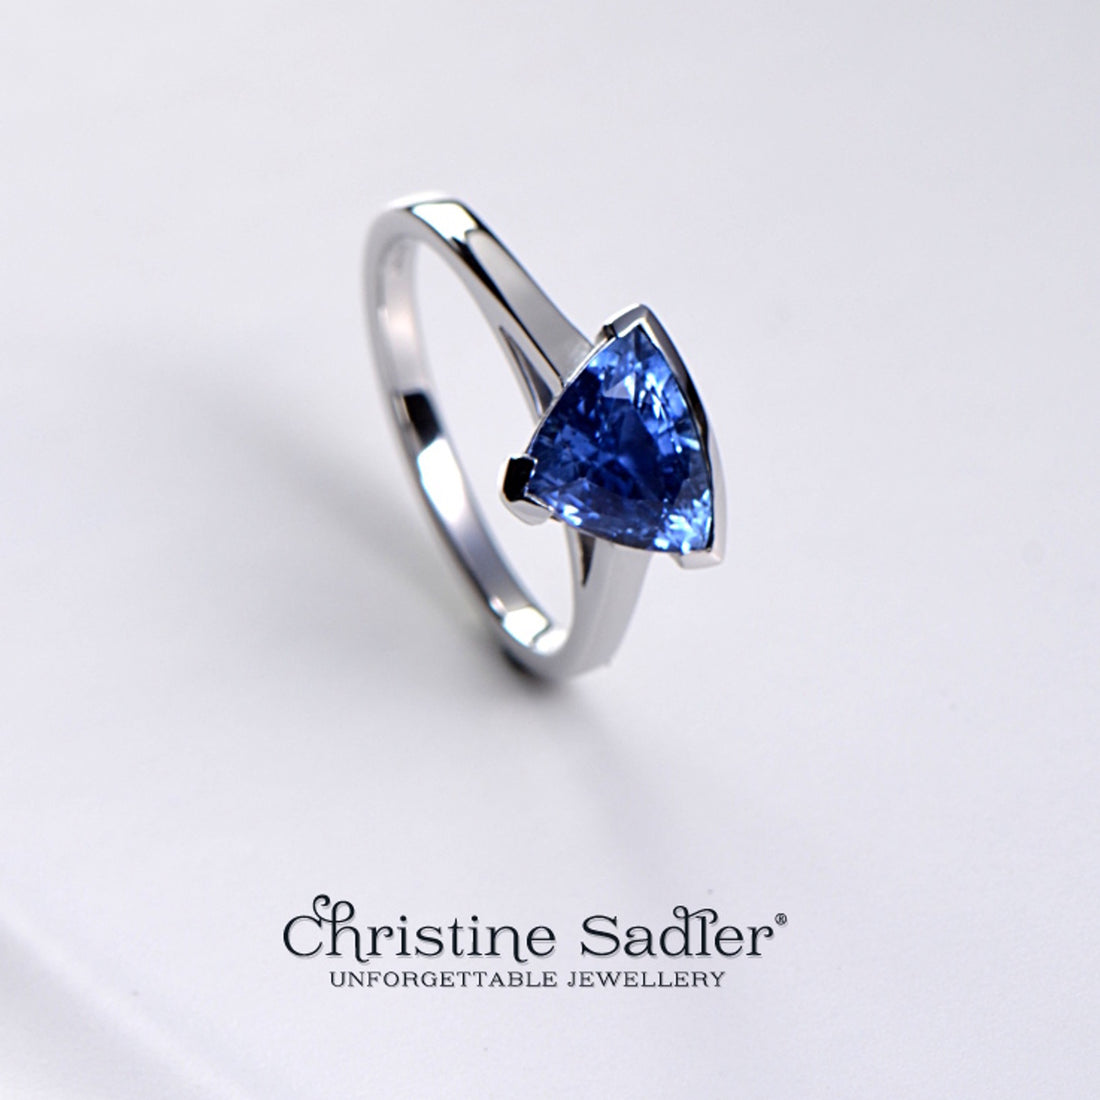 Slingshot commission ring - Ceylon sapphire in 18ct white gold